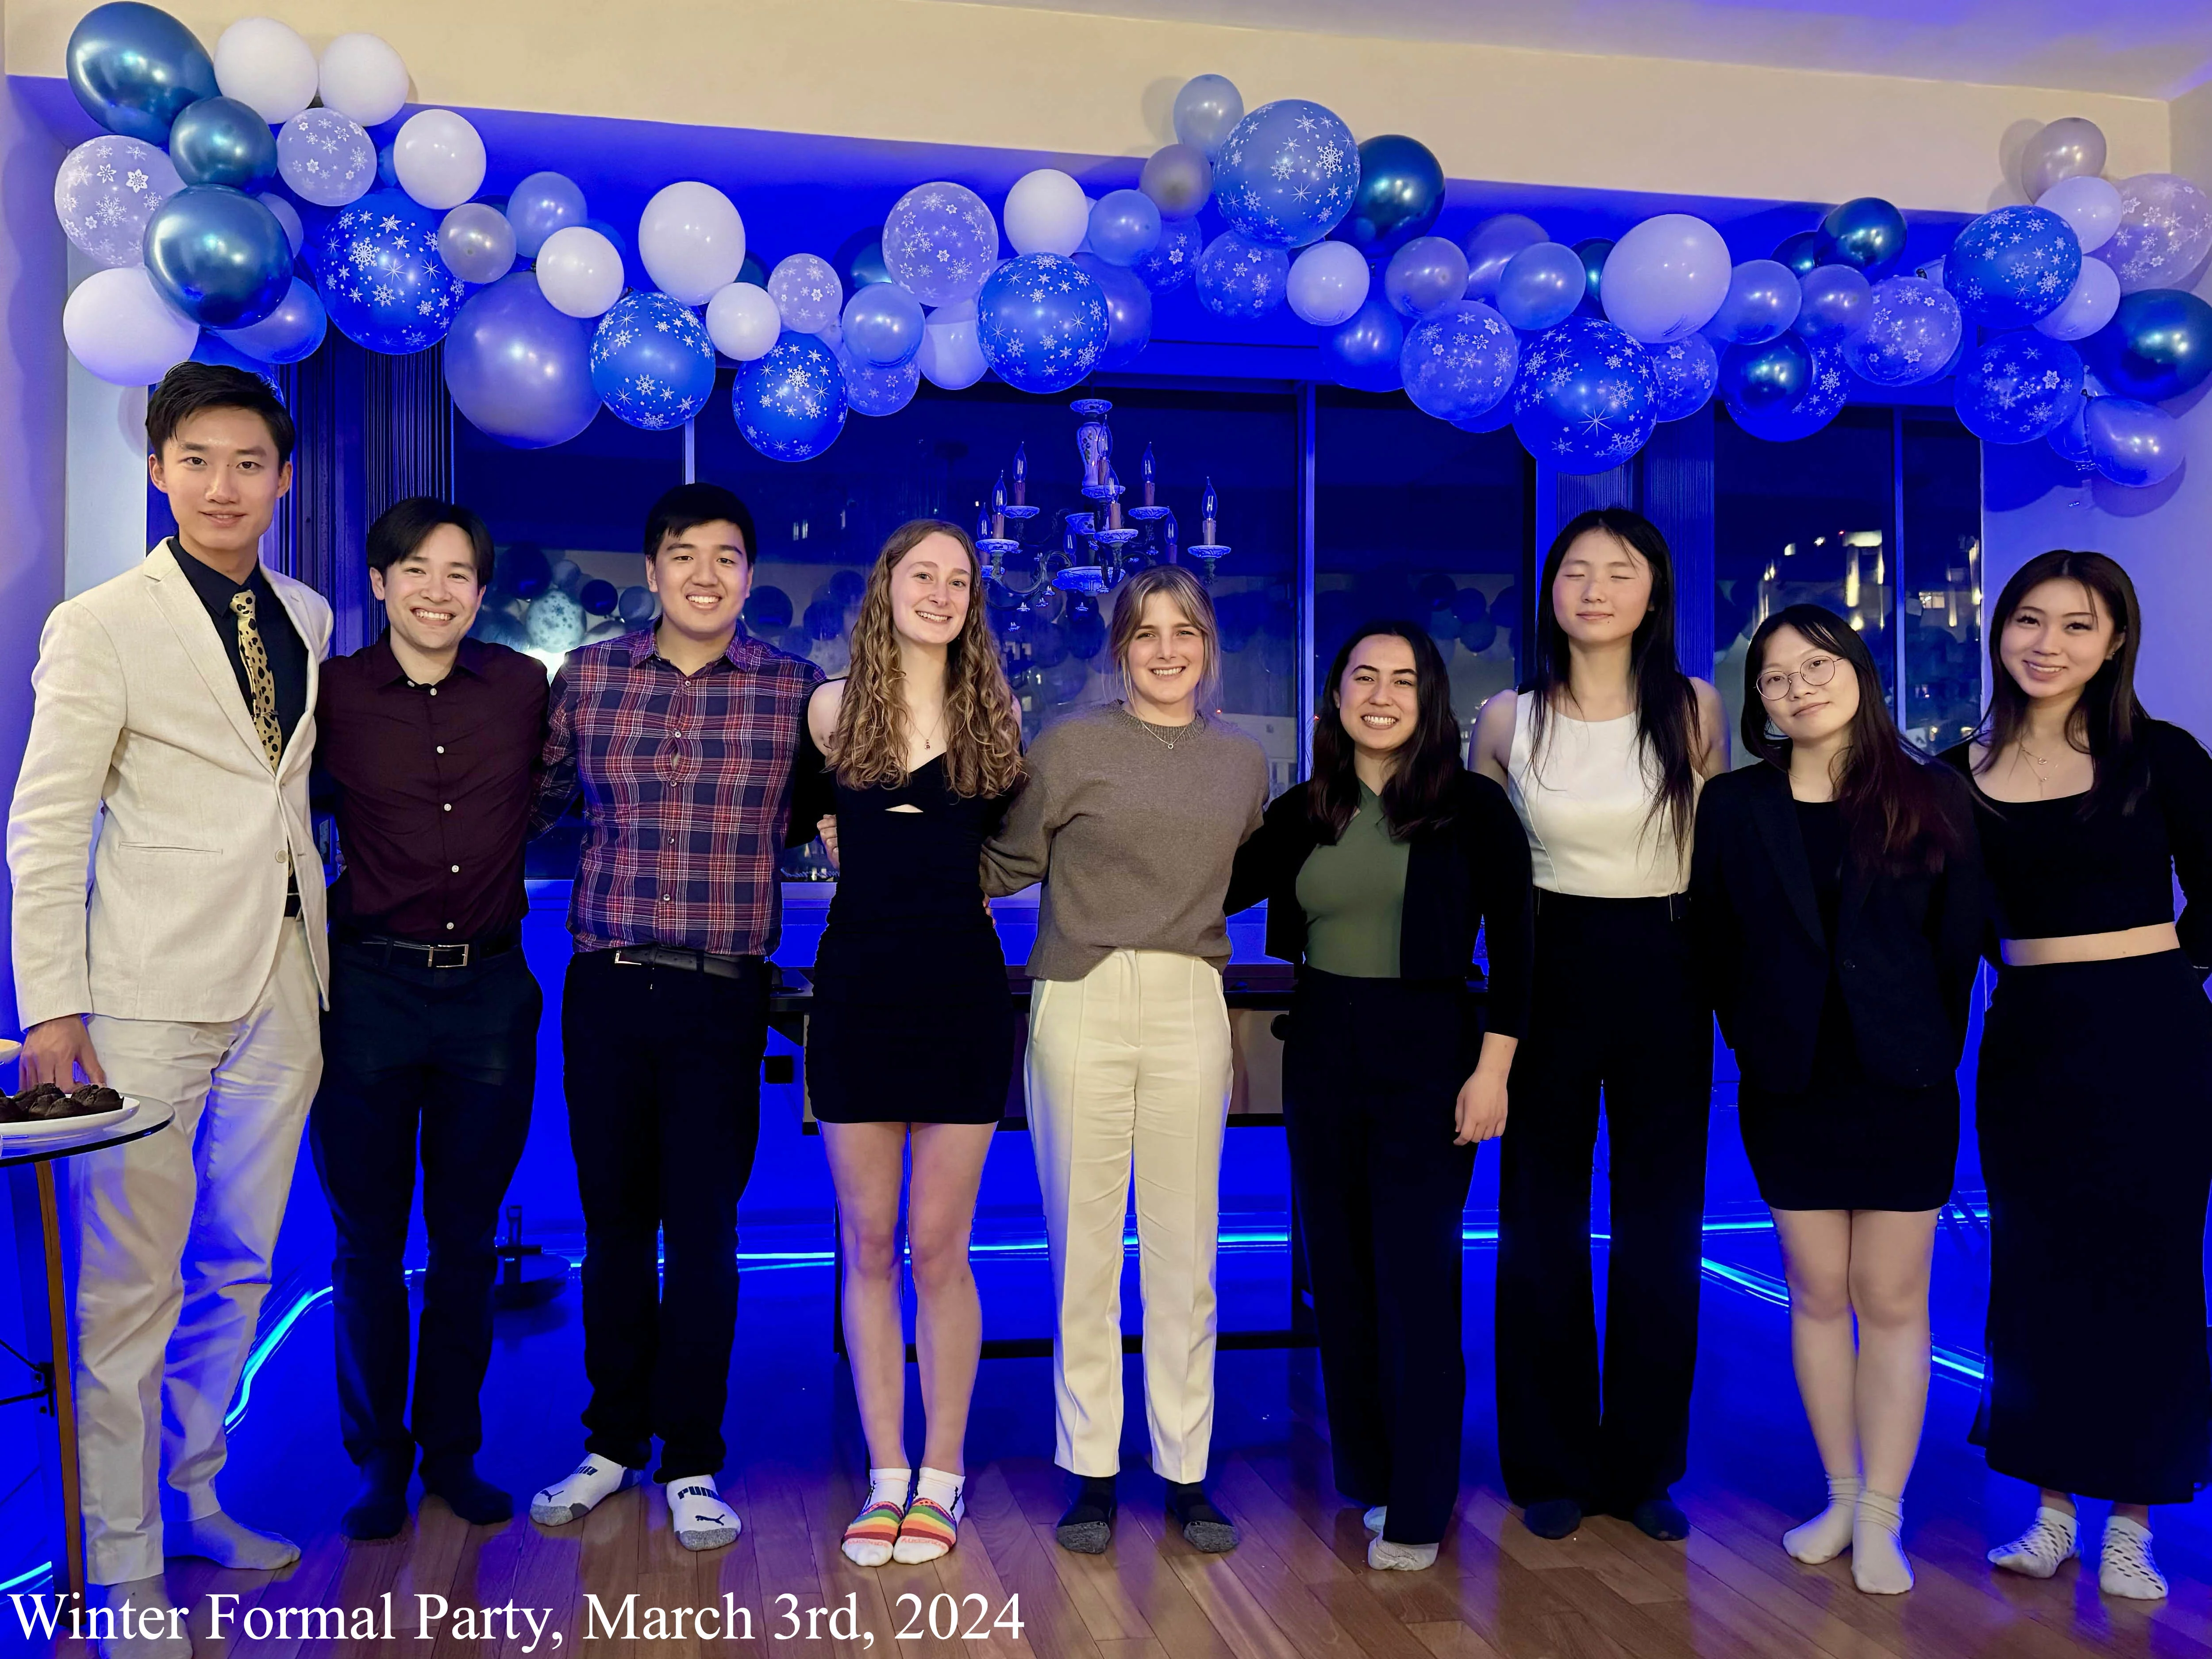 lab undergraduates dress formally for a dinner party